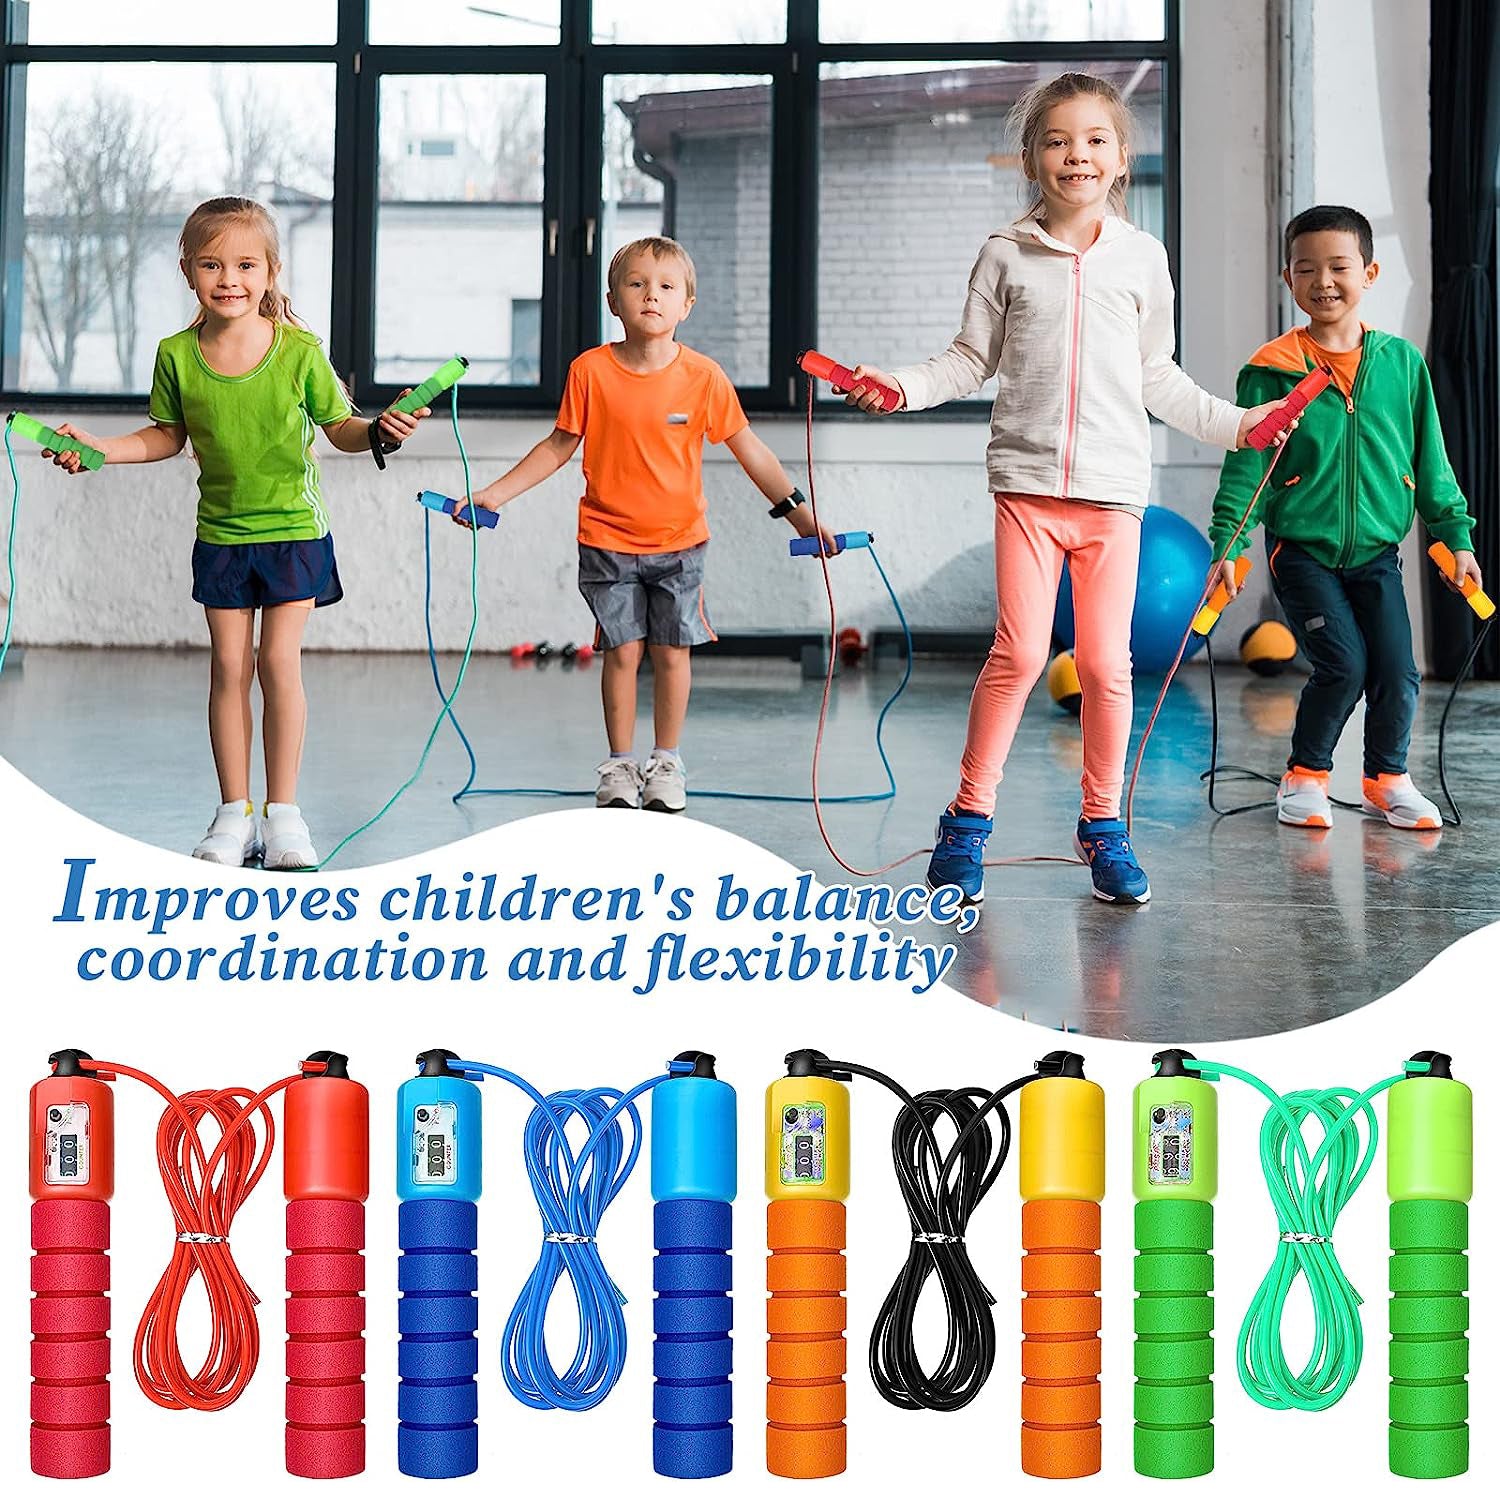 Best Skipping Rope for Beginners